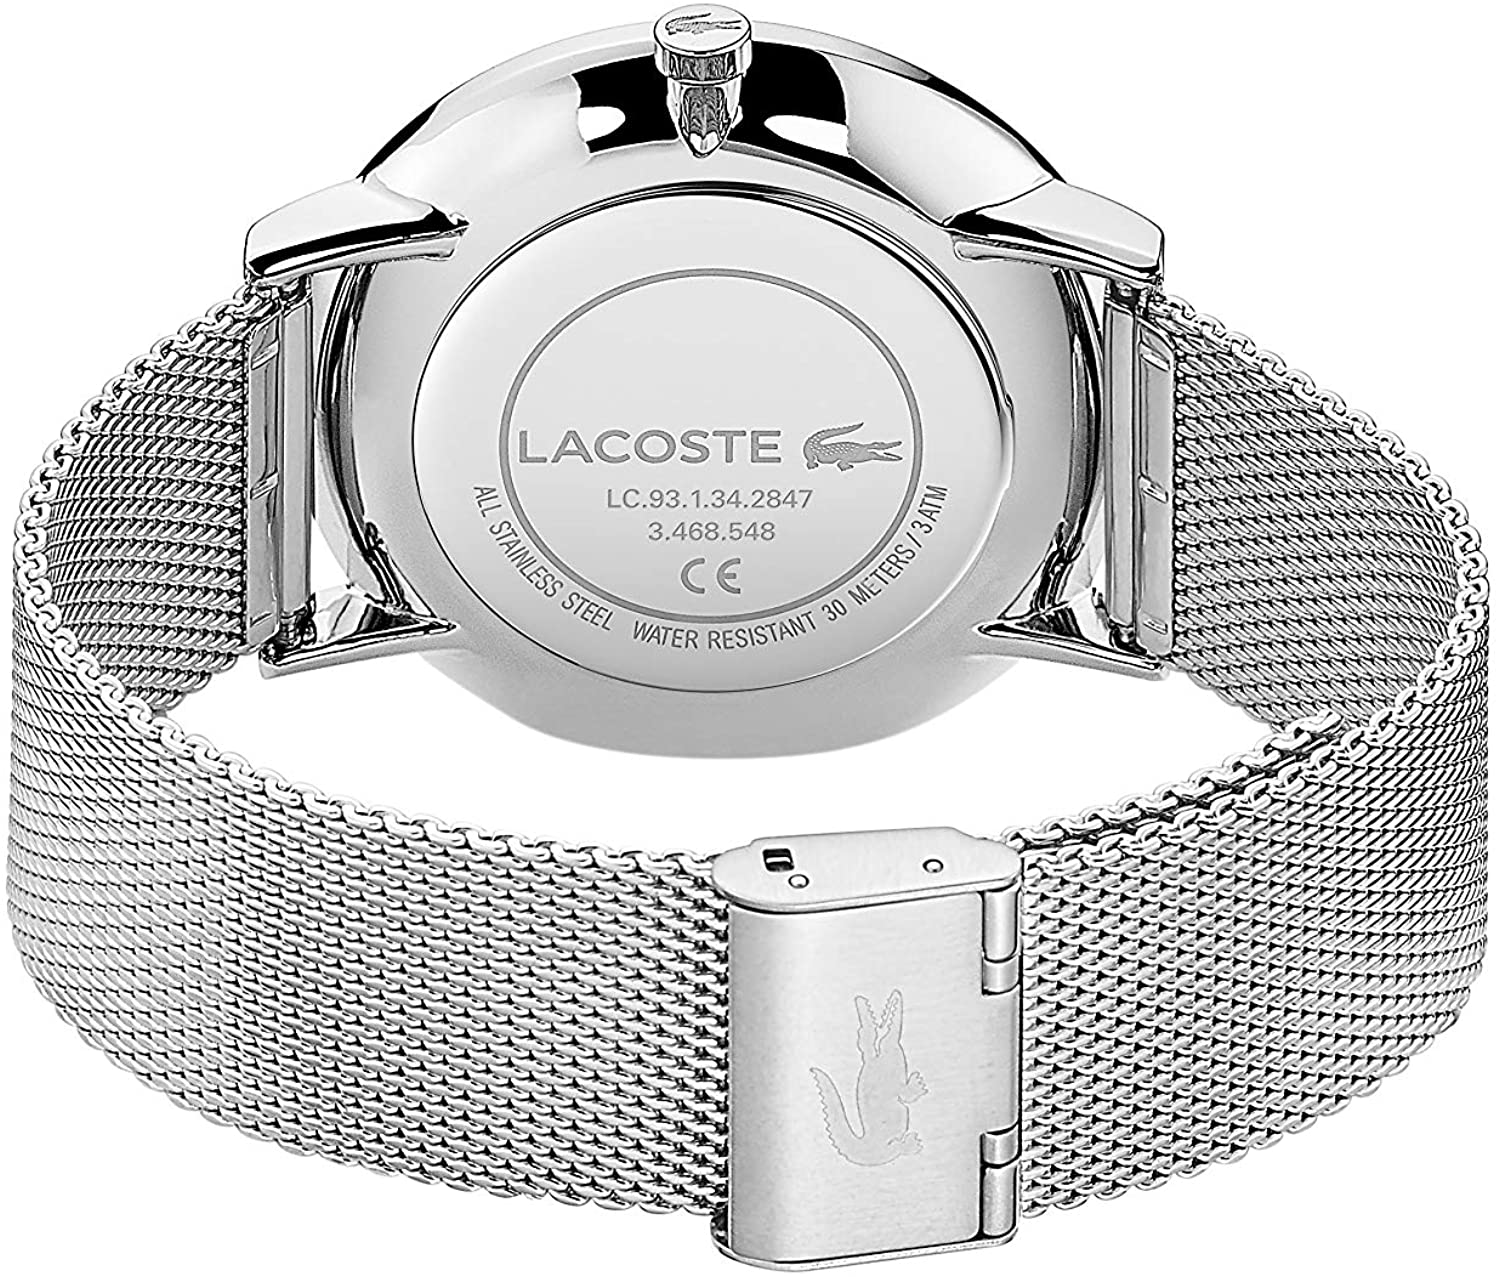 Lacoste Quartz Watch with Stainless Steel Strap, Silver, 20 (Model: 2011024)